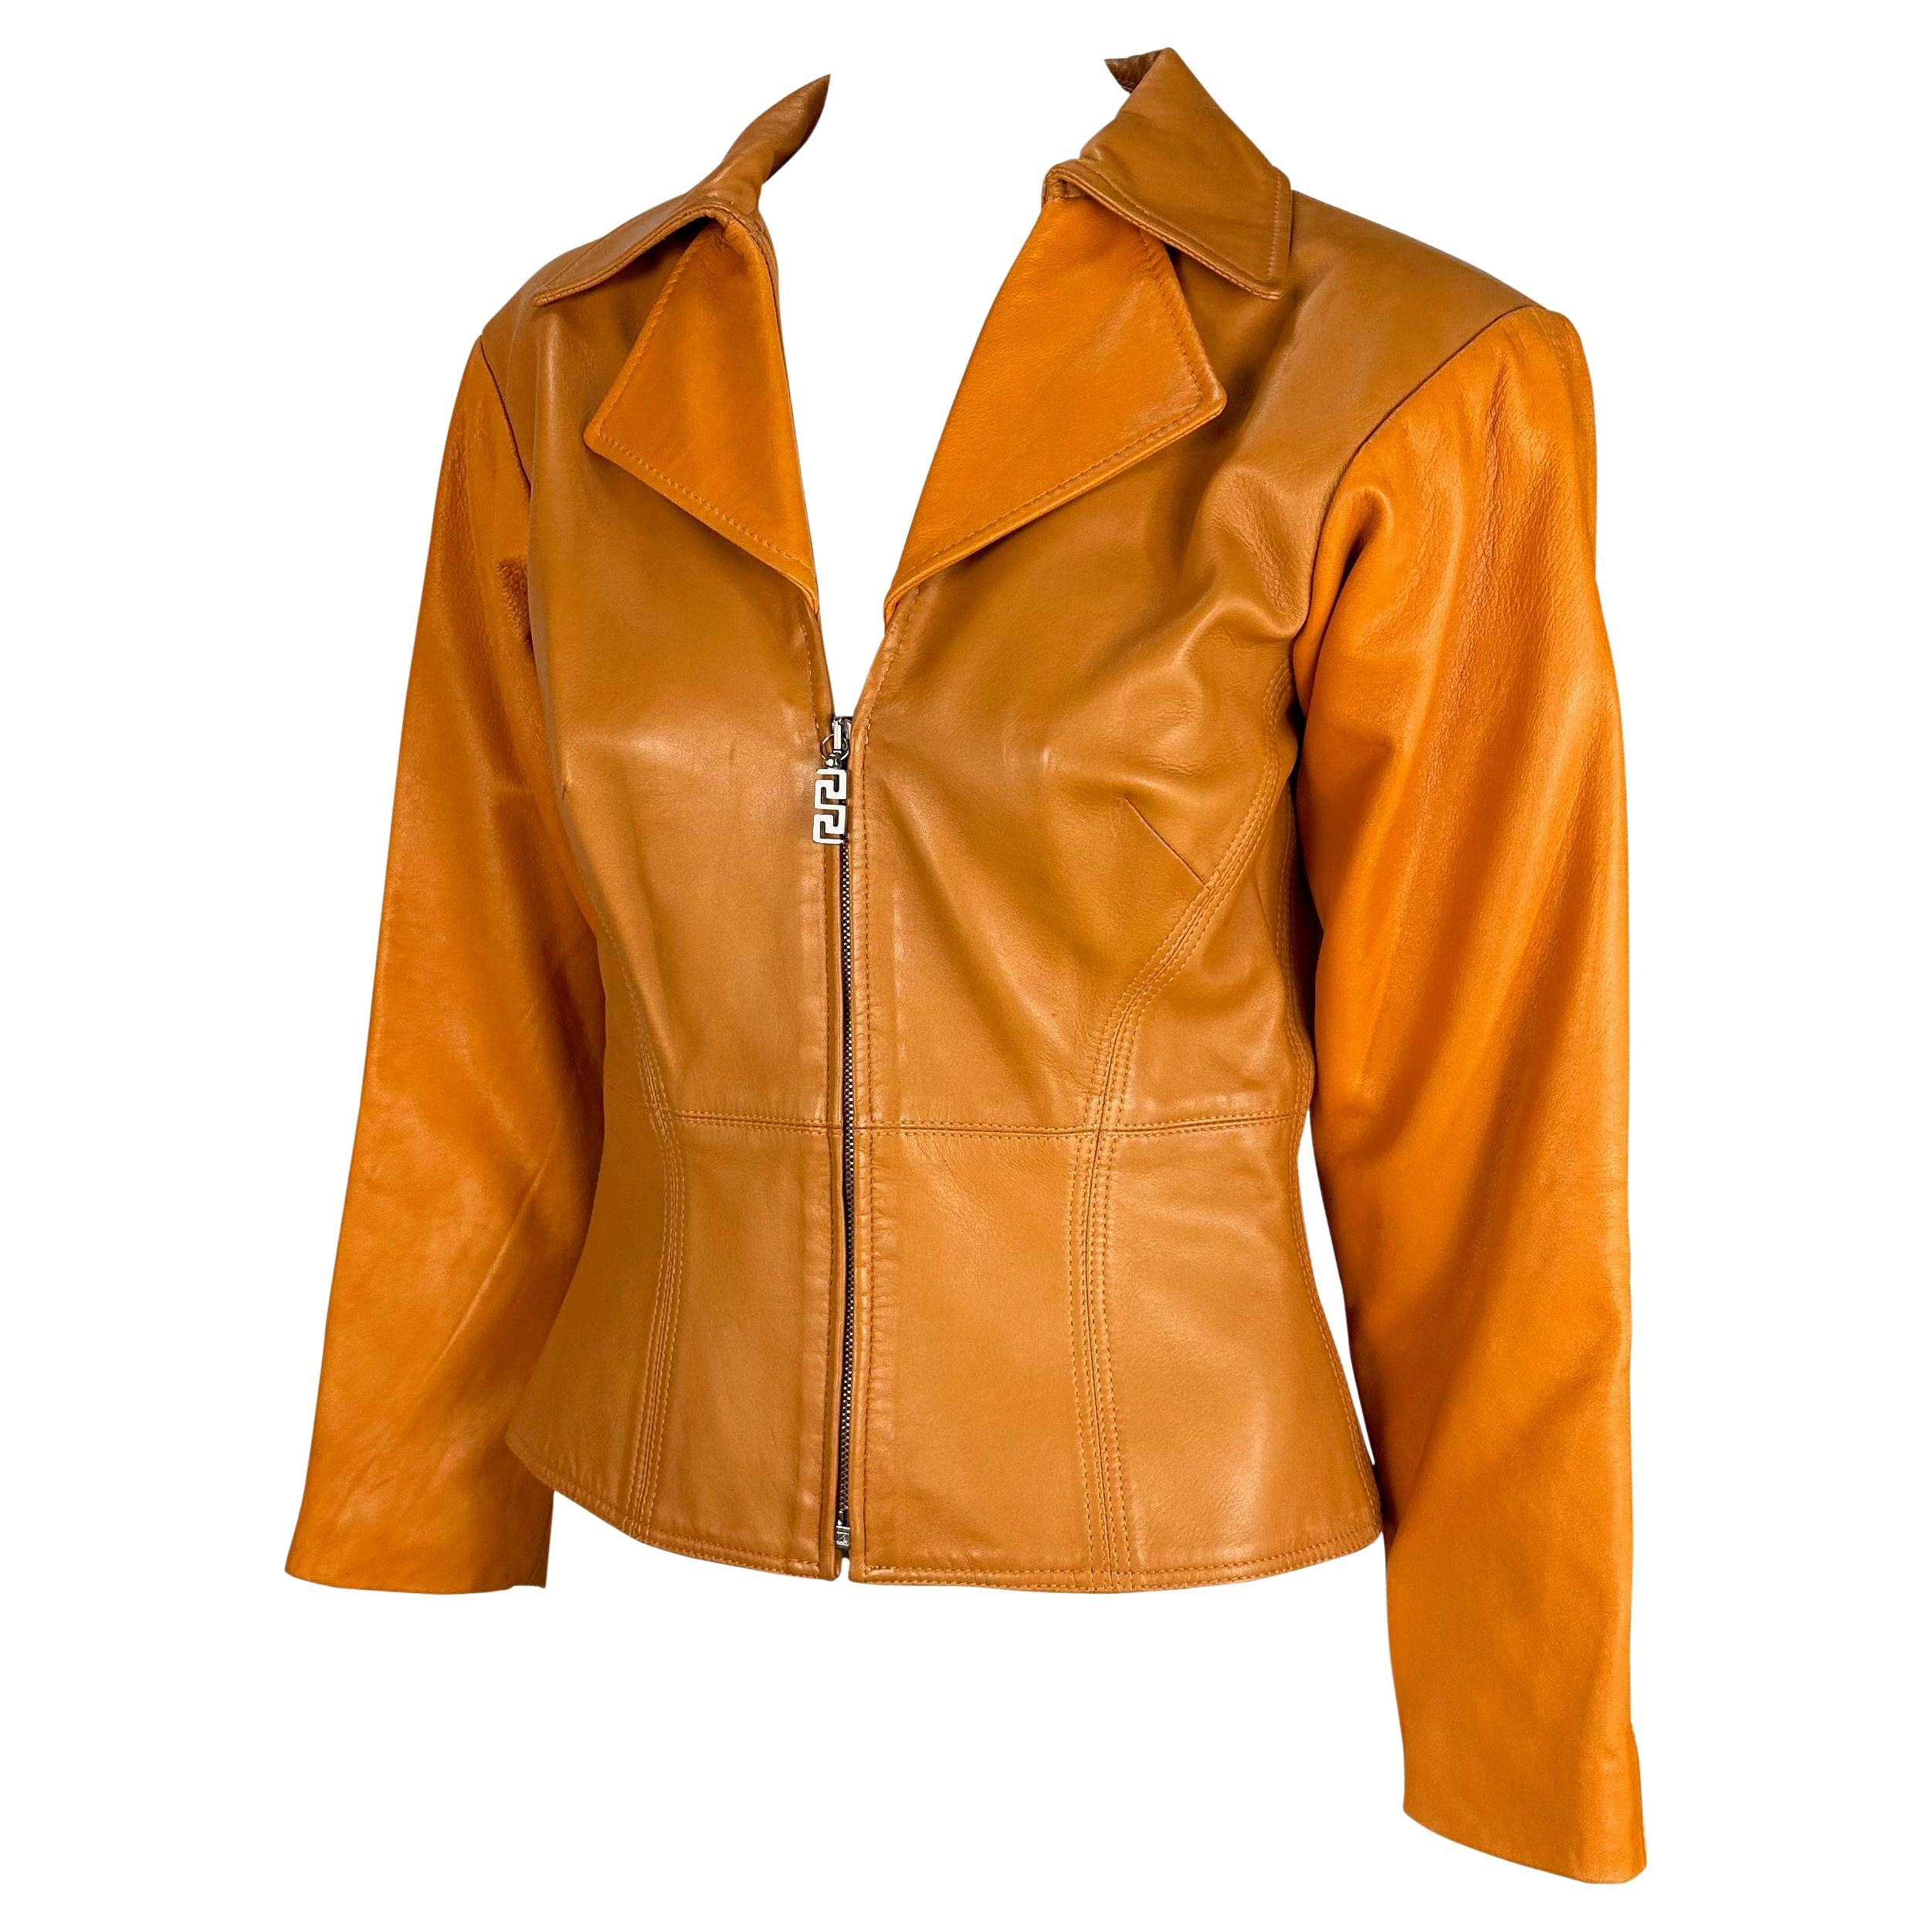 Presenting a beautiful orange leather Gianni Versace Couture jacket, designed by Donatella Versace. This unique piece features a collar, deep neckline, an half zip closure. Designed by Donatella Versace in the early 2000s, this jacket is made